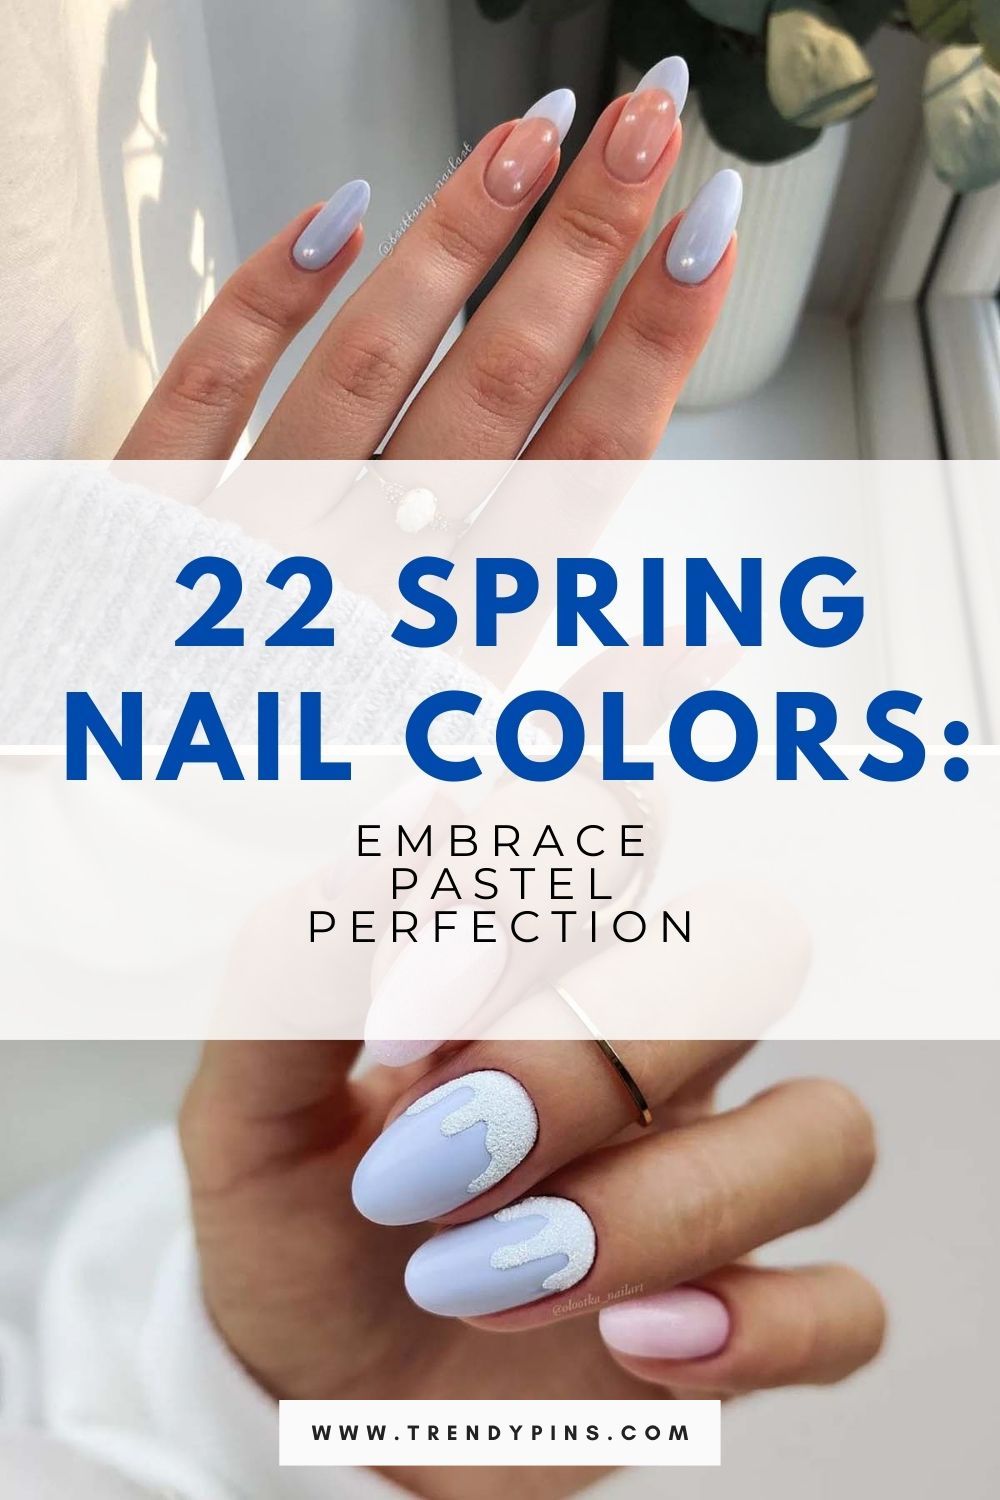 Pastel Nail Colors For Spring 2